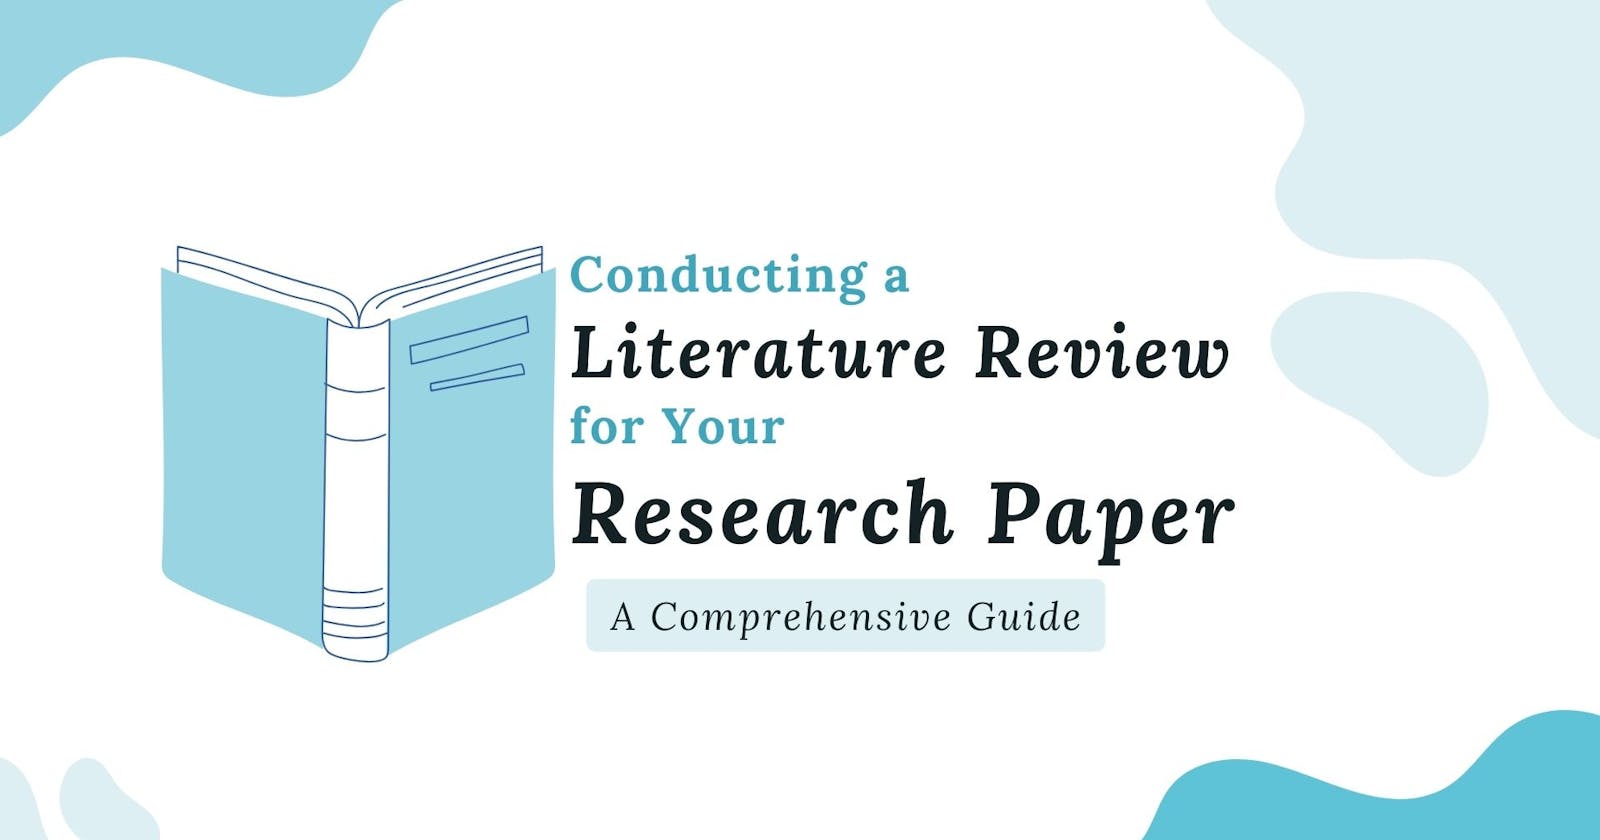 Conducting a Literature Review for Your Research Paper: A Comprehensive Guide